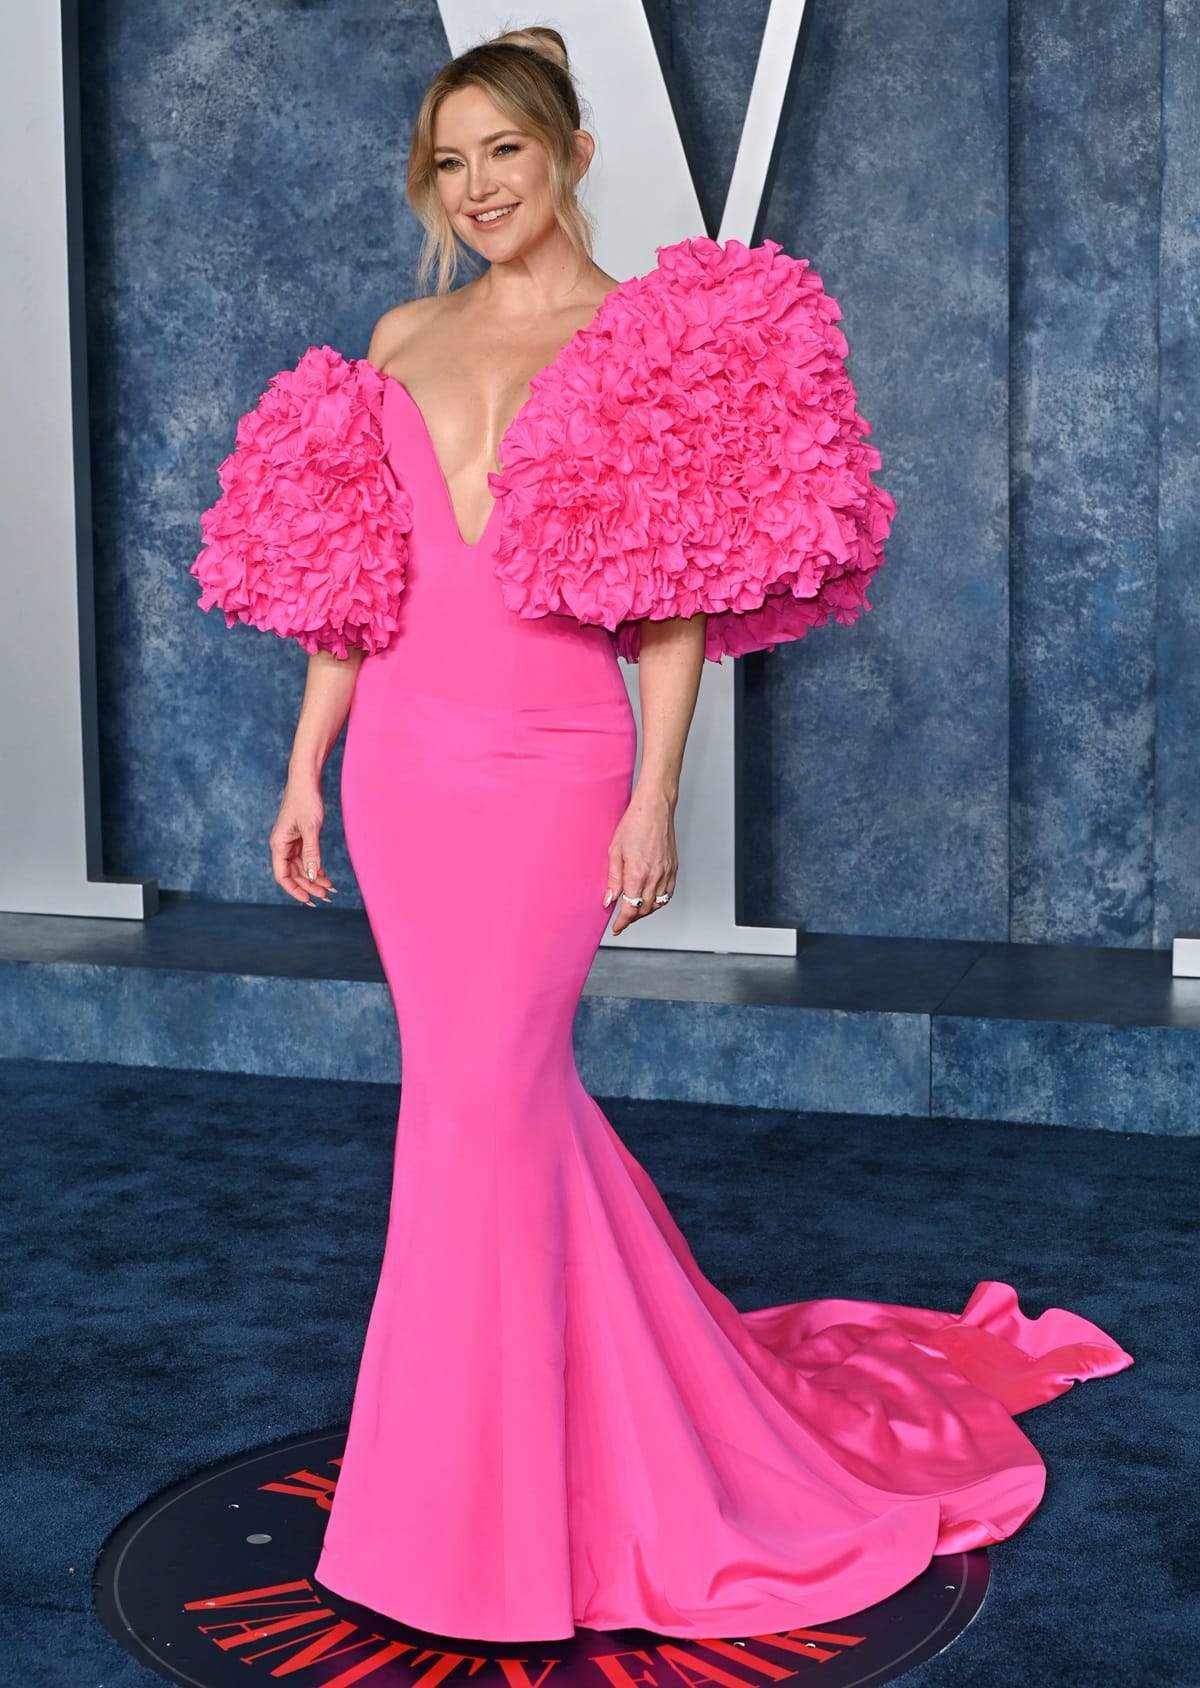 Kate Hudson donned a Tamara Ralph Couture hot-pink gown embellished with extravagant ruffled shoulder details at the 2023 Vanity Fair Oscar Party